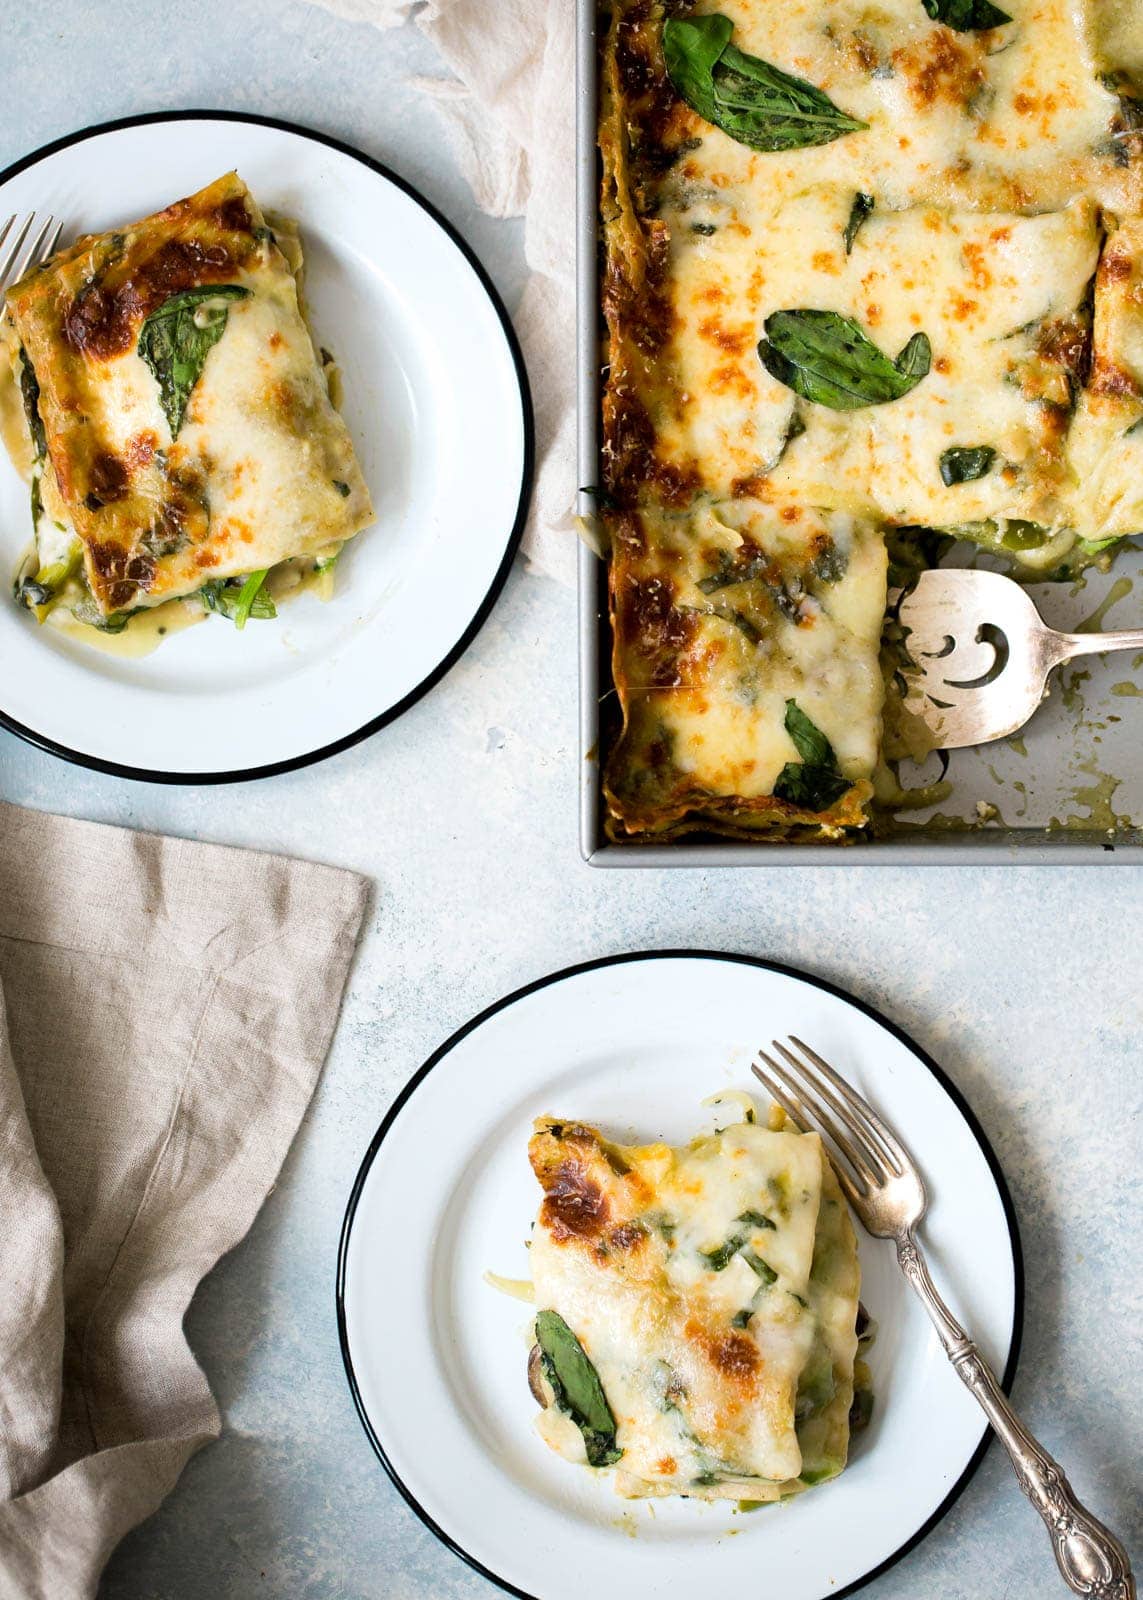 Green Goddess Lasagna fit for the goddess in all of us. Packed with veggies, goat cheese, and fresh basil.